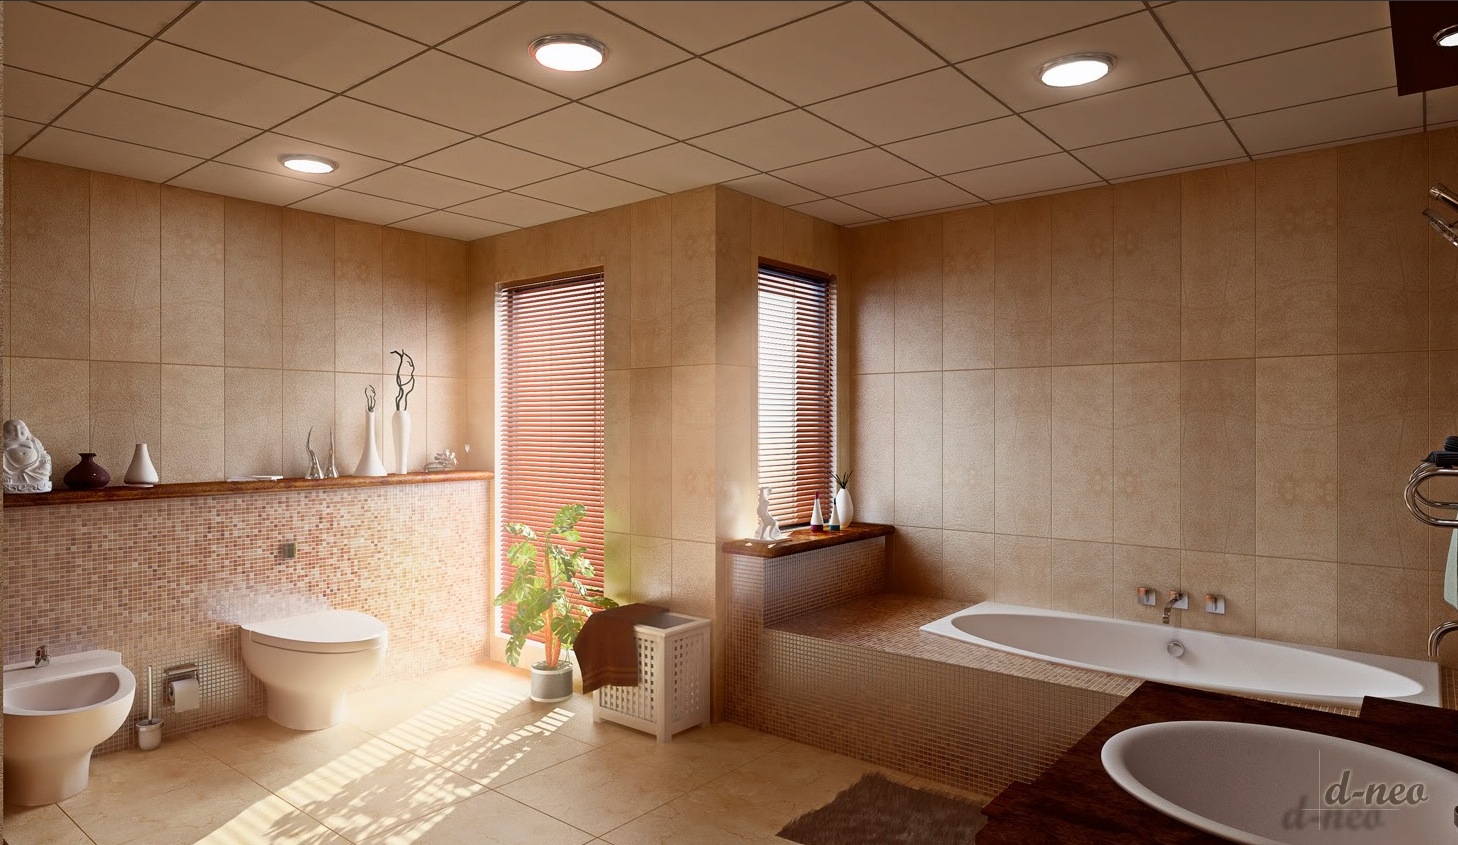 Permalink to Ceiling Tile Ideas For Bathroom